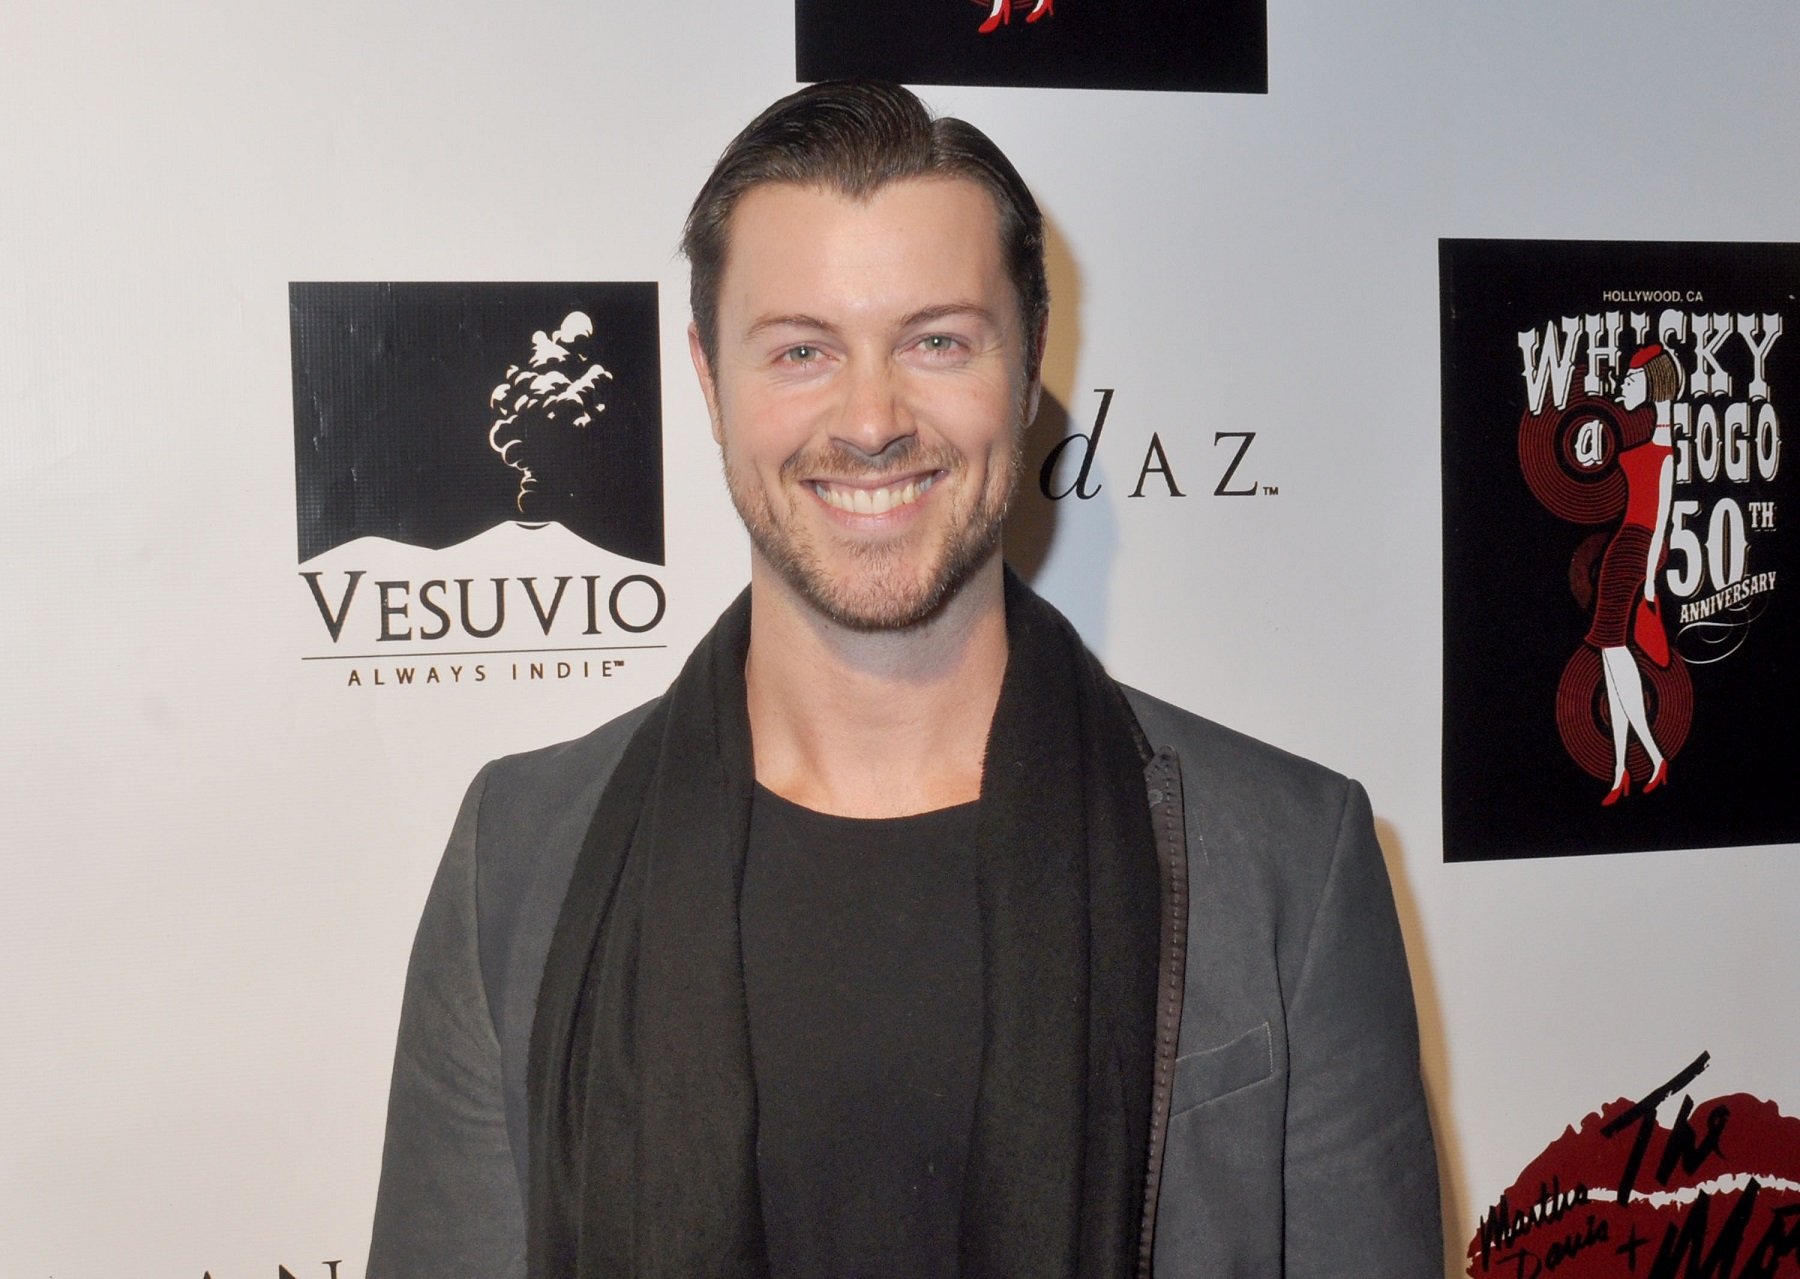 Days of Our Lives star Dan Feuerriegel, pictured here in a black shirt with a grey jacket and a black scarf